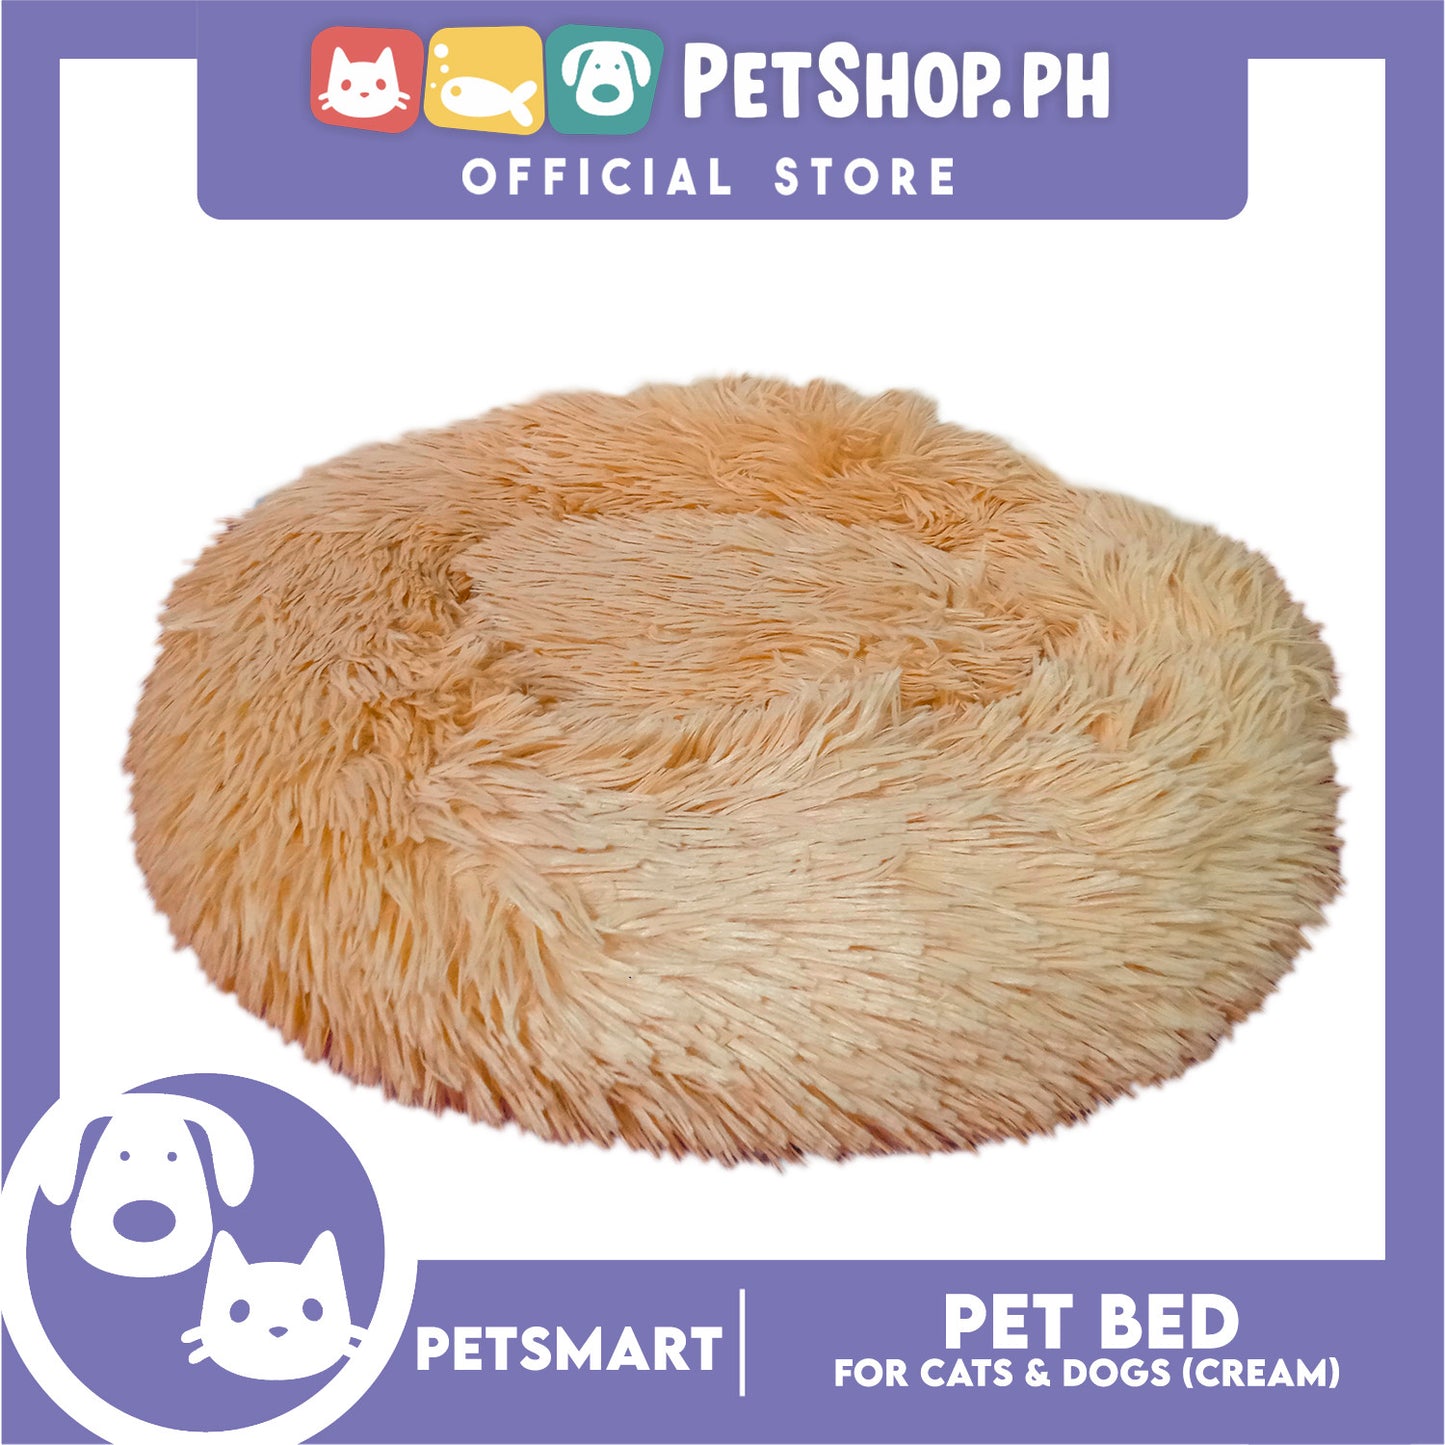 Pet Bed for Cats and Dogs (Cream Color) Medium Size 55cm x 45cm x 8cm